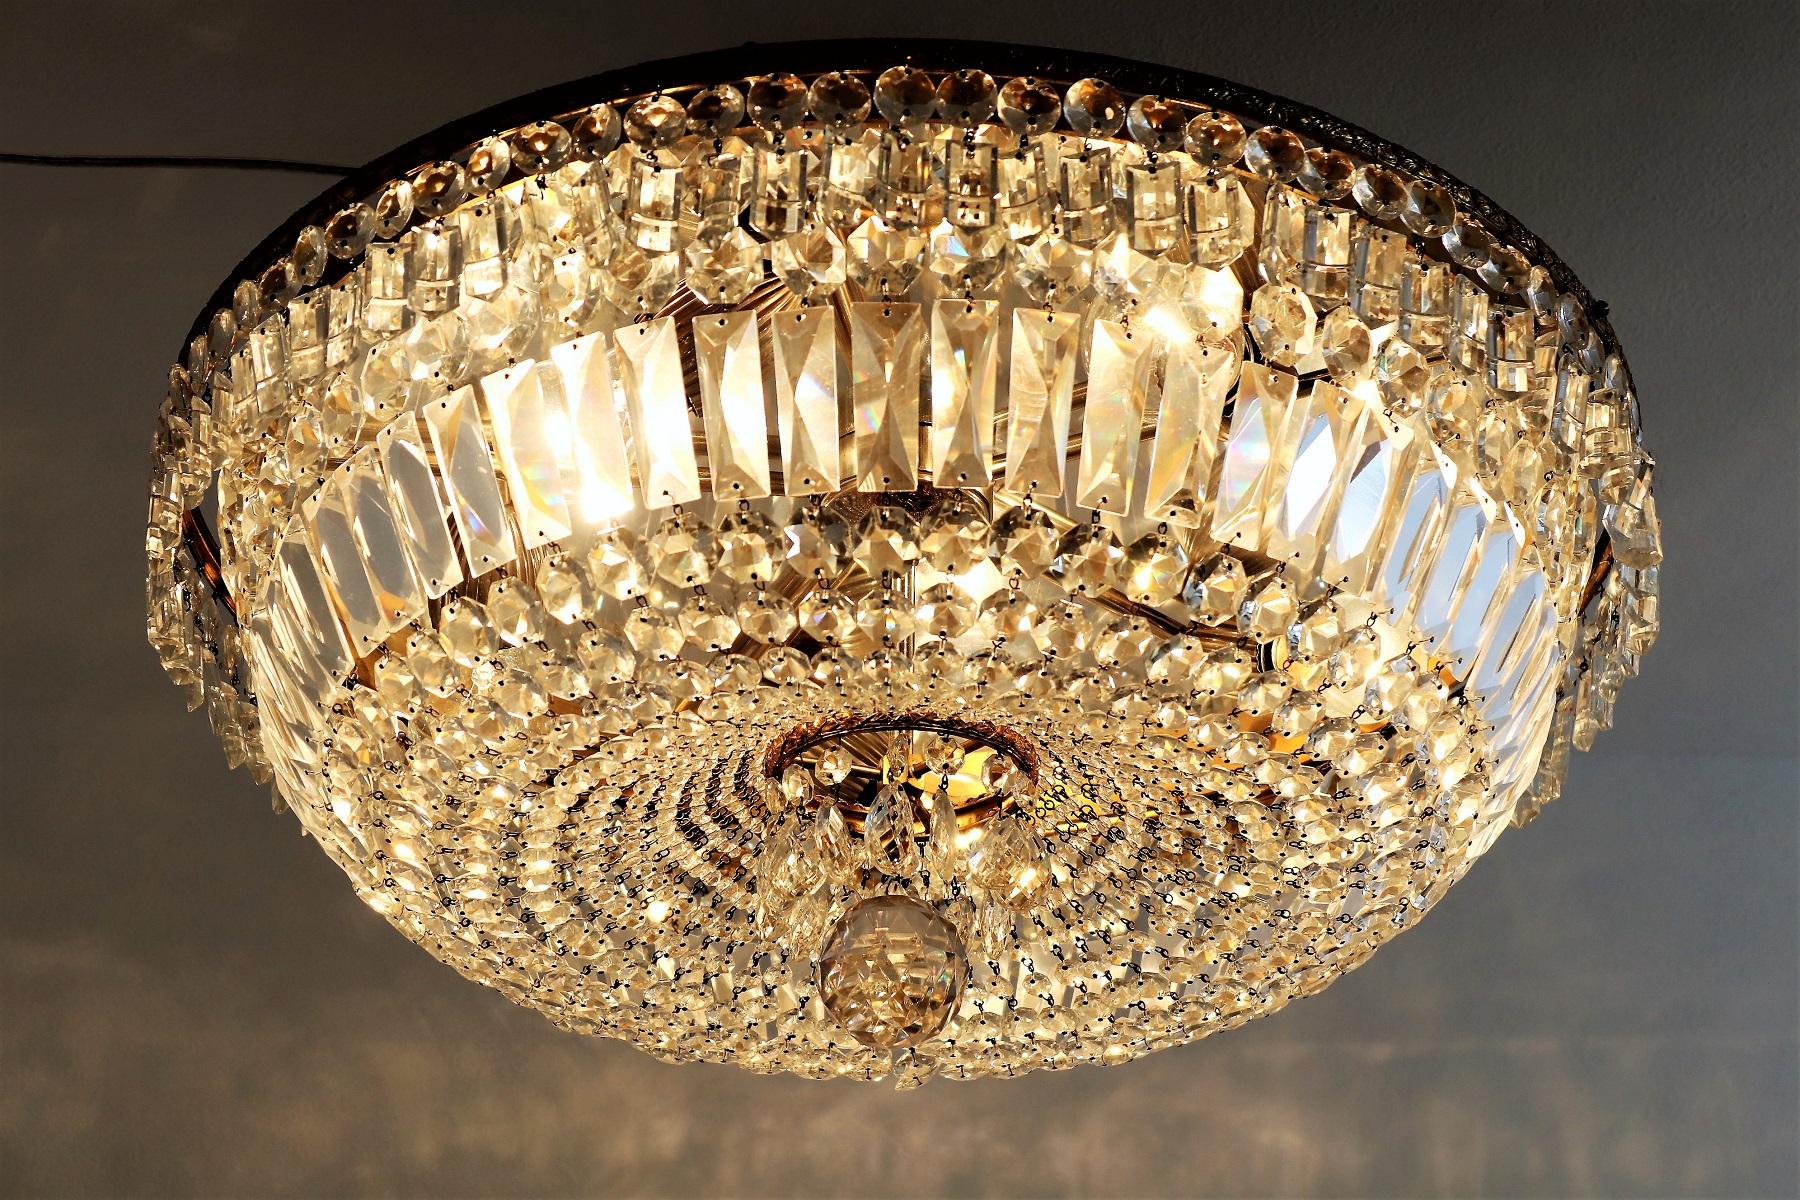 Beautiful and big Murano flush mount chandelier with crystal glasses and double brass frame.
Made in Italy during the 1950s.
This piece is coming originally from a dancing ballroom.
When the sun shines on it or it's lit up, the crystals are shining